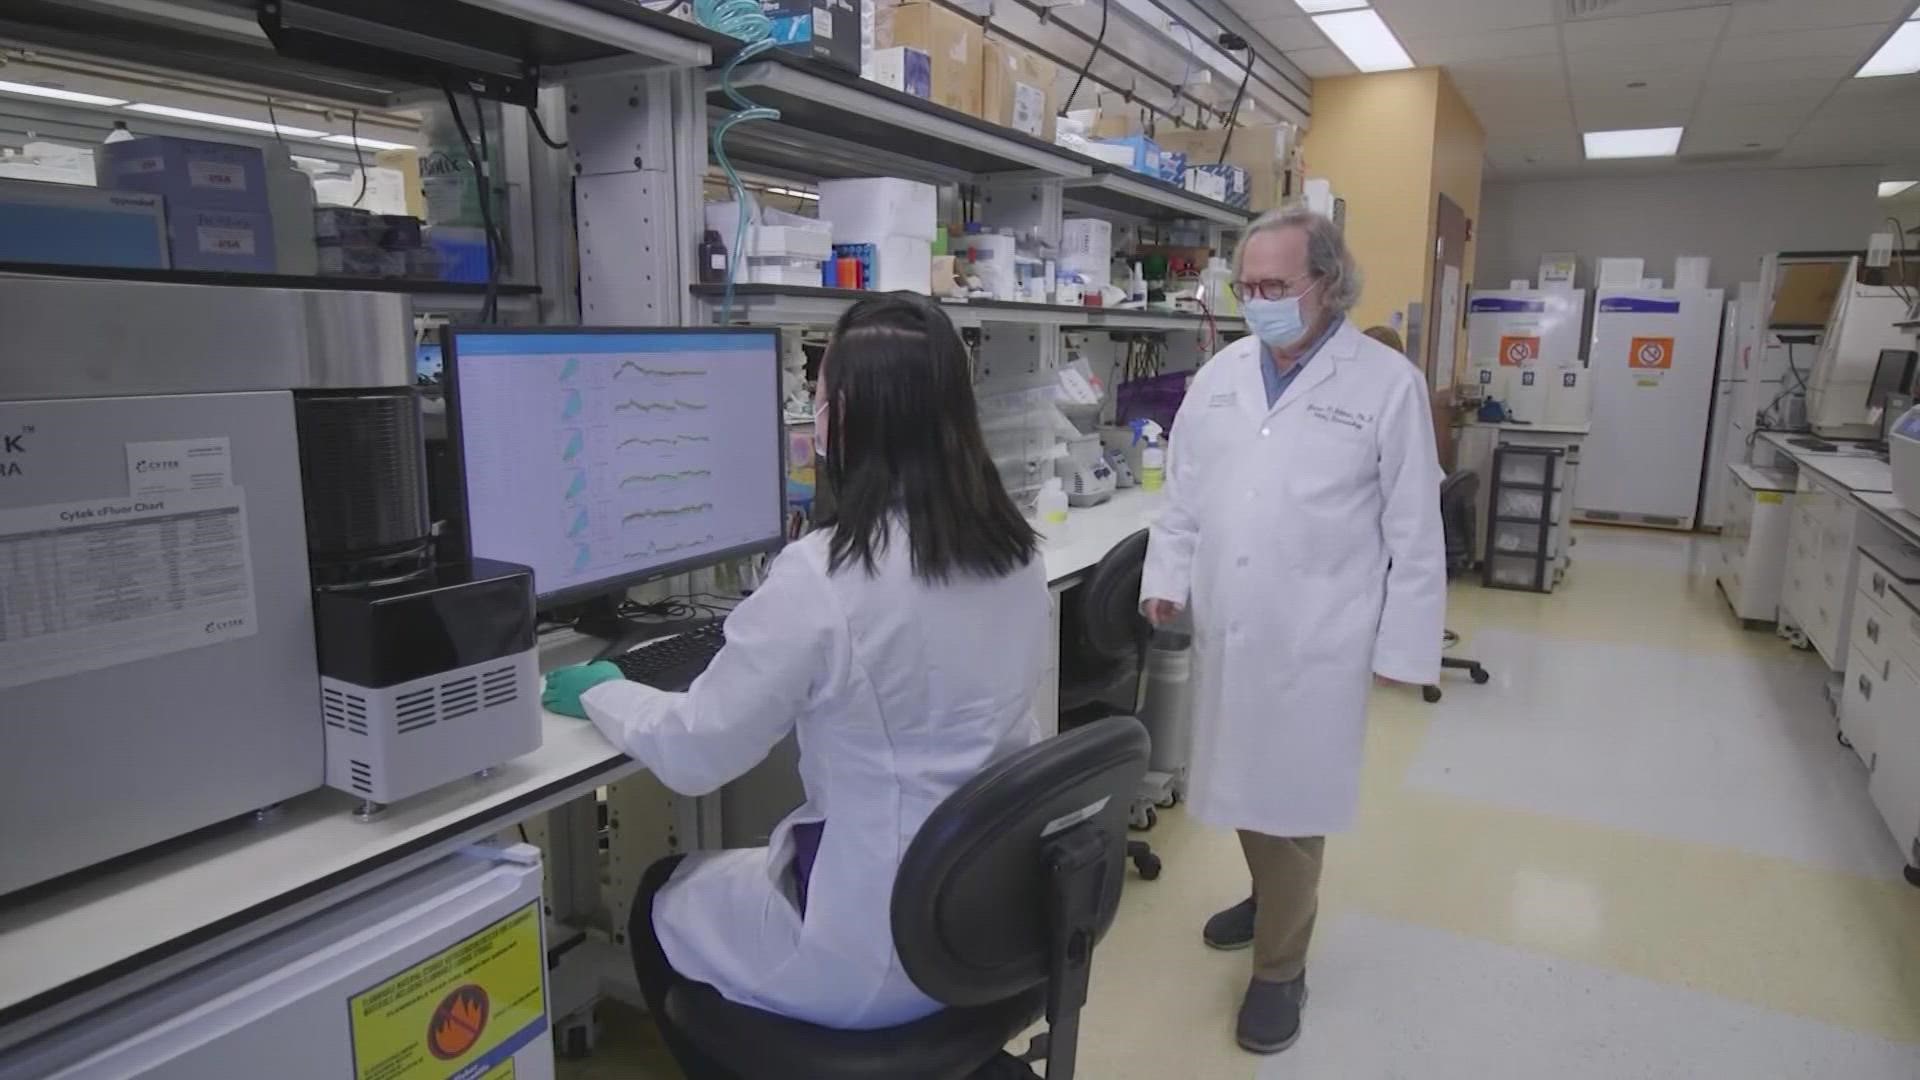 Nobel Prize winner, Dr. James Allison, the "Father of Immunotherapy," said the goal is to save more lives by raising the cure rate for all types of cancers.